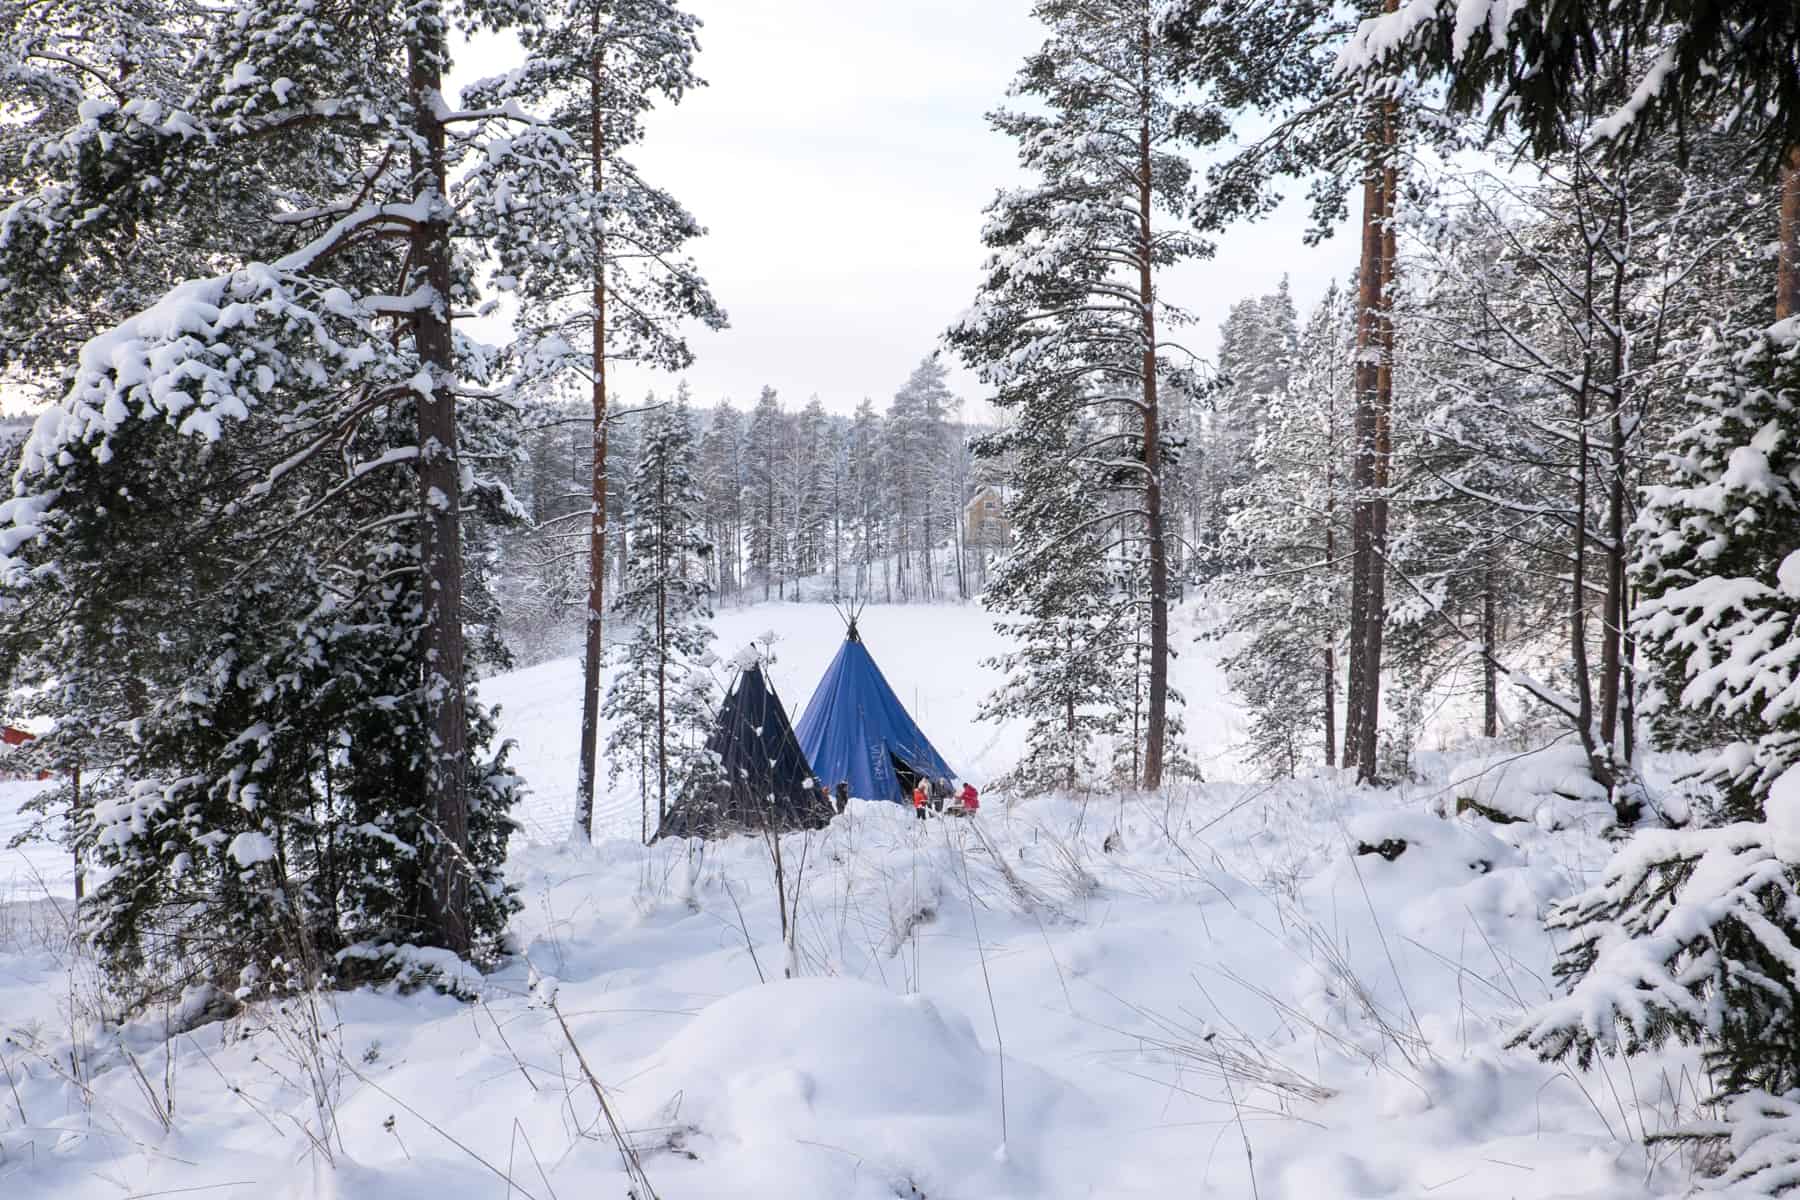 Two people dressed in red next to a black and blue teepee tent set within a forest covered in deep snow in Finland – where everyman has the right to roam. 